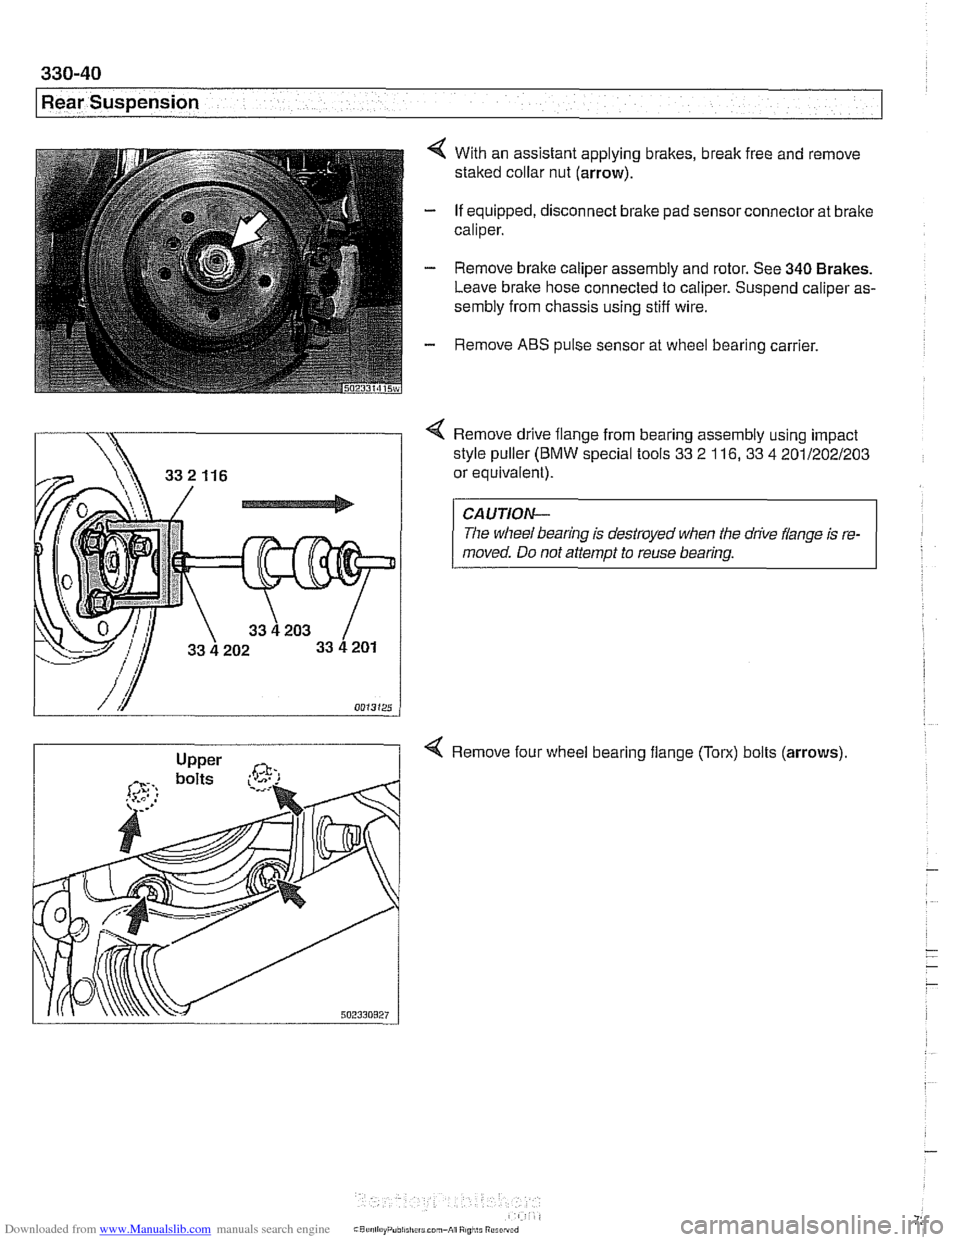 BMW 525i 2001 E39 Owners Guide Downloaded from www.Manualslib.com manuals search engine 
330-40 
Rear Suspension 
4 With an assistant applying brakes, break free and  remove 
staked  collar nut  (arrow). 
- If equipped,  disconnect